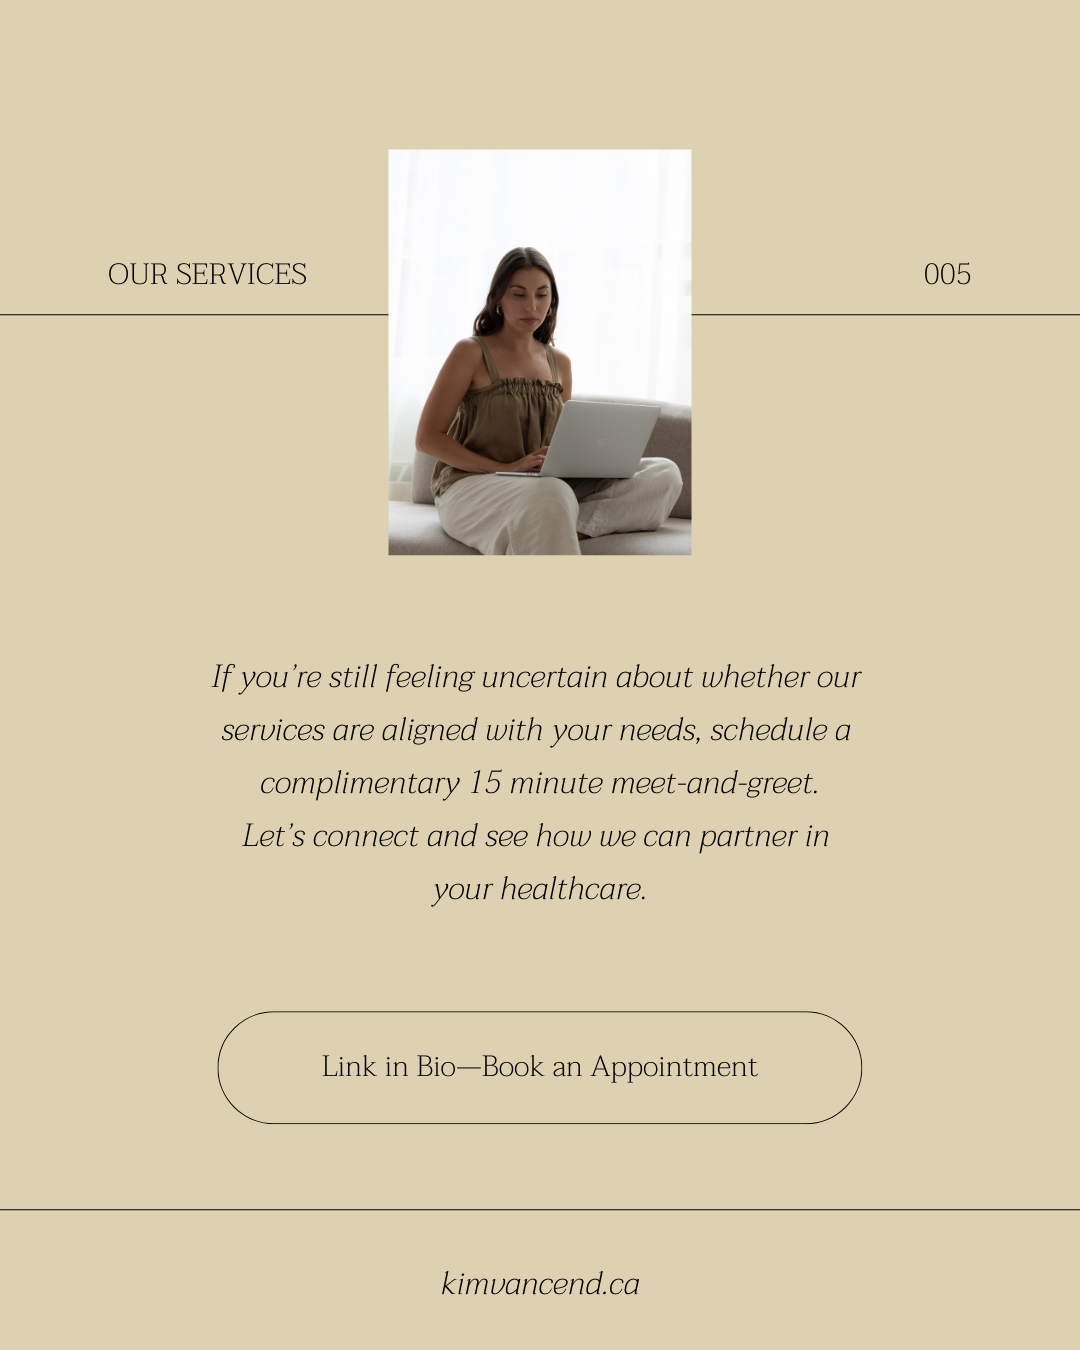 Services-kim-vance-carousel-5.png